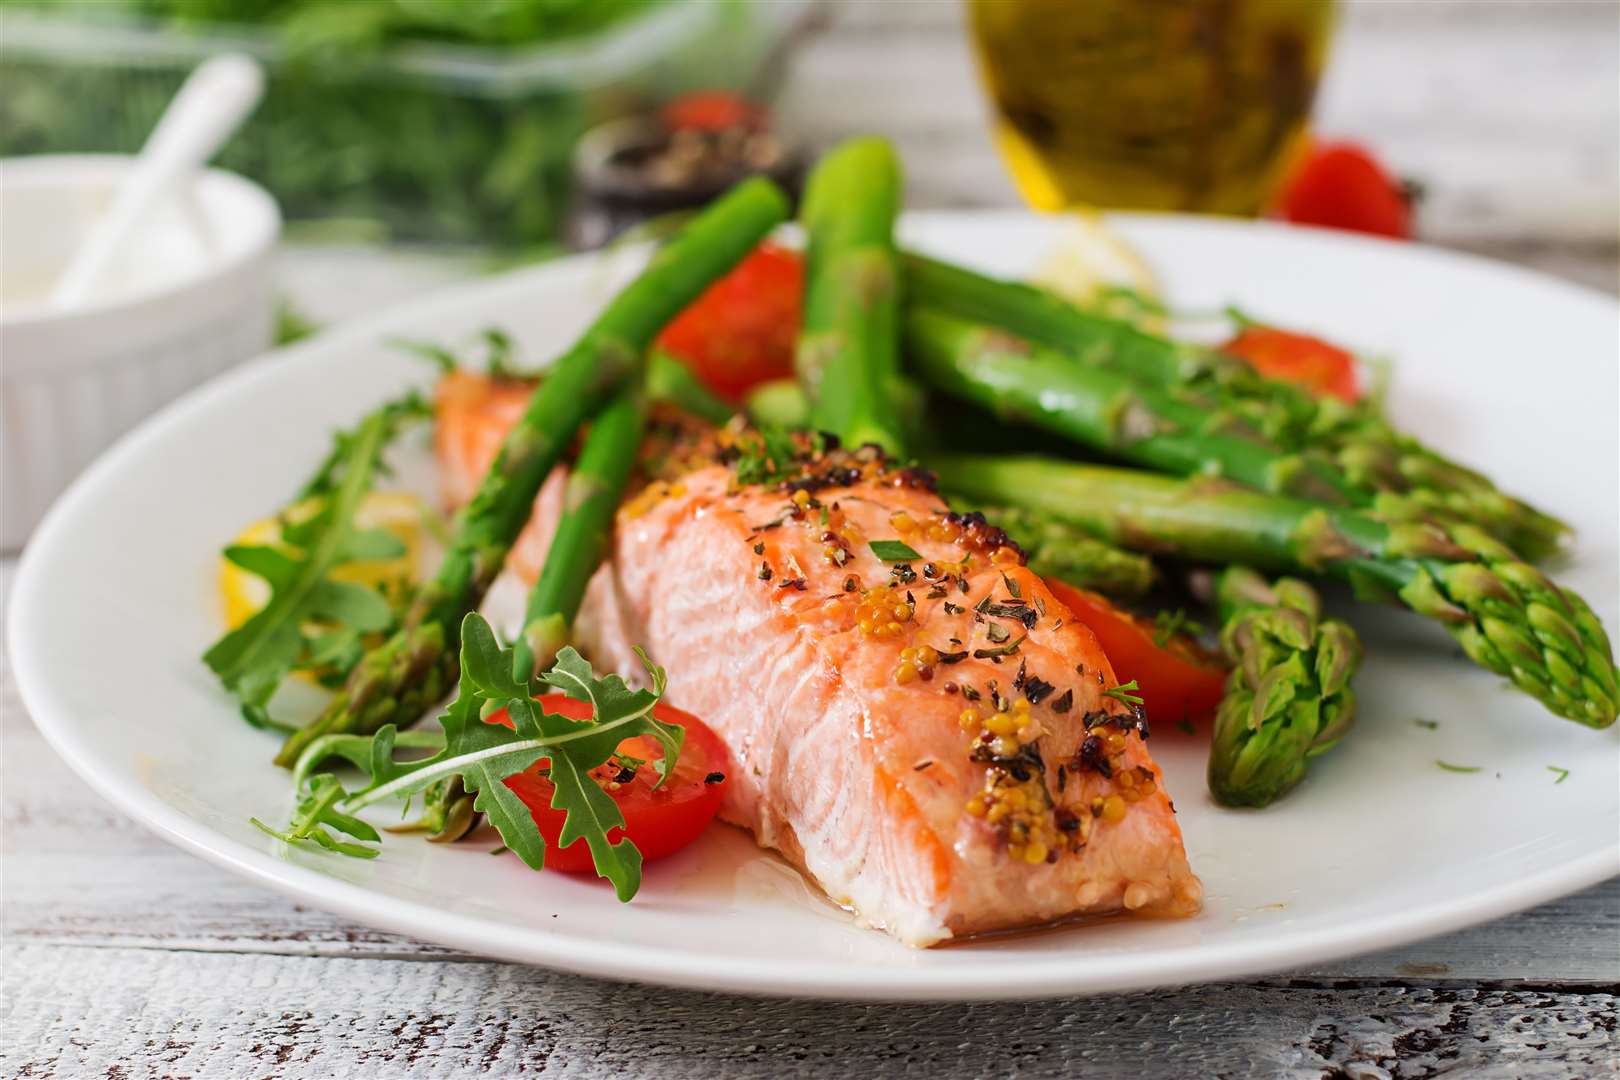 Baked salmon garnished with asparagus and tomatoes with herbs. (34777005)